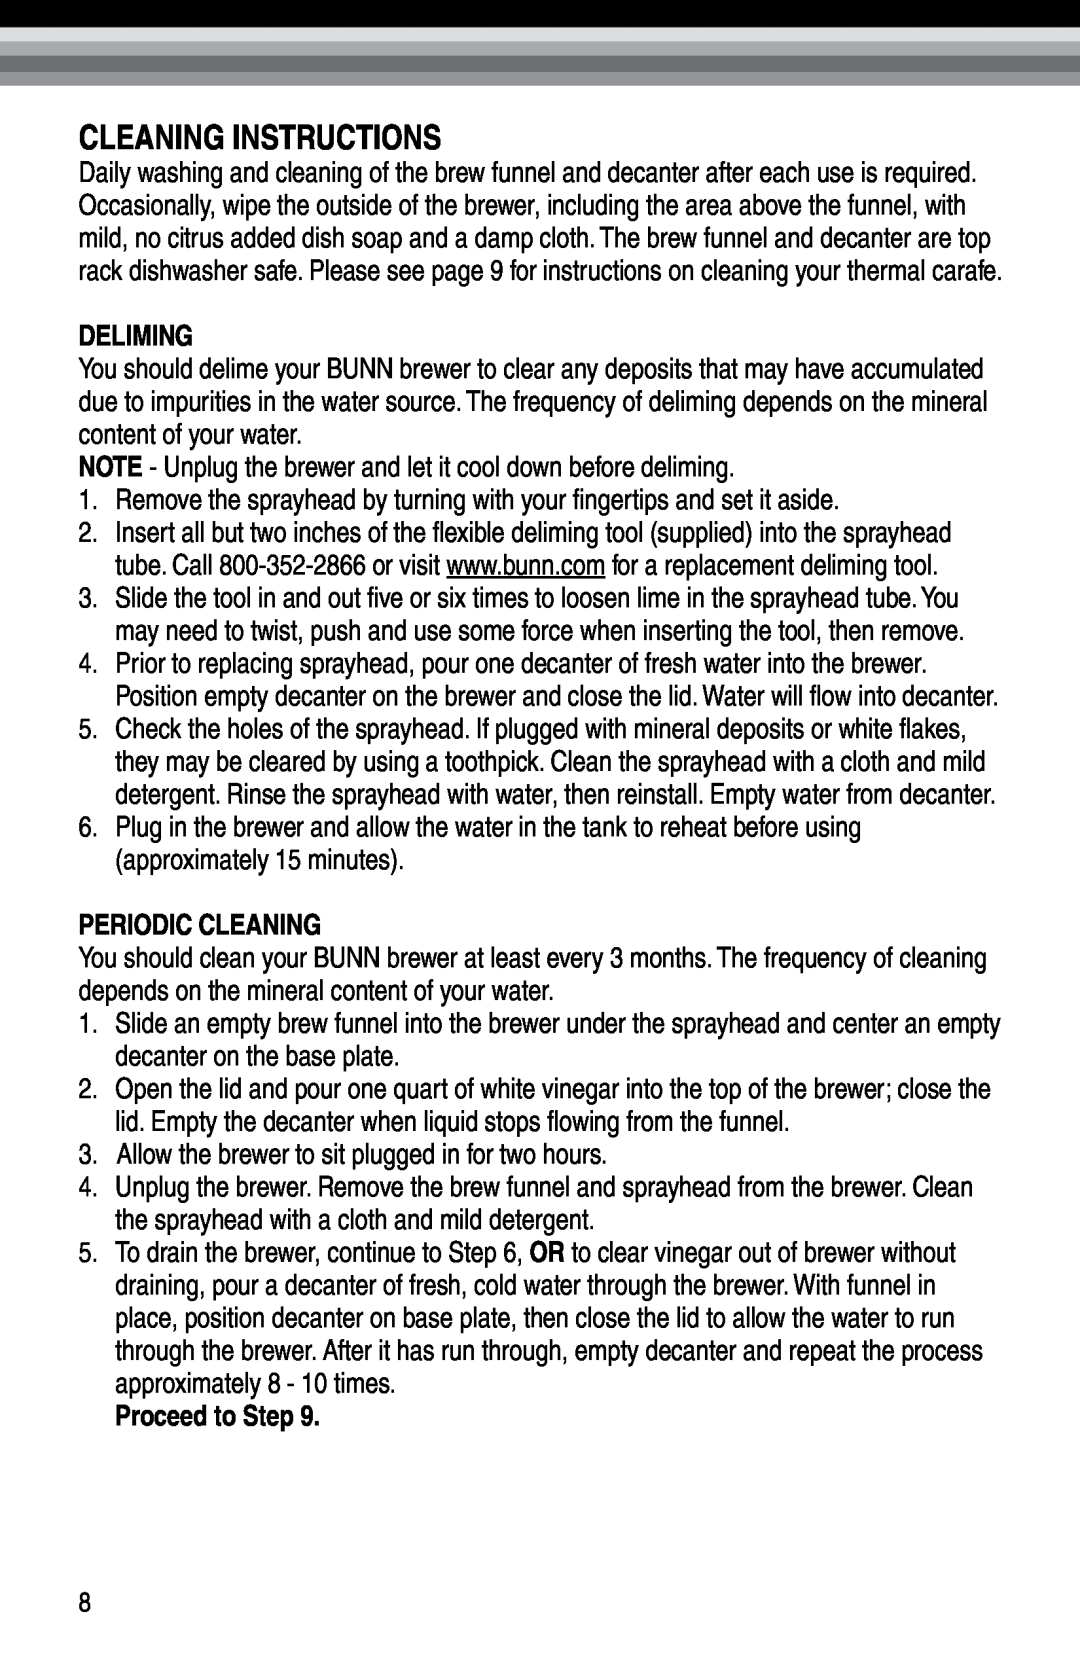 Bunn NHBX, Bunn BTX-B manual Cleaning Instructions, Deliming, Periodic Cleaning, Proceed to Step 